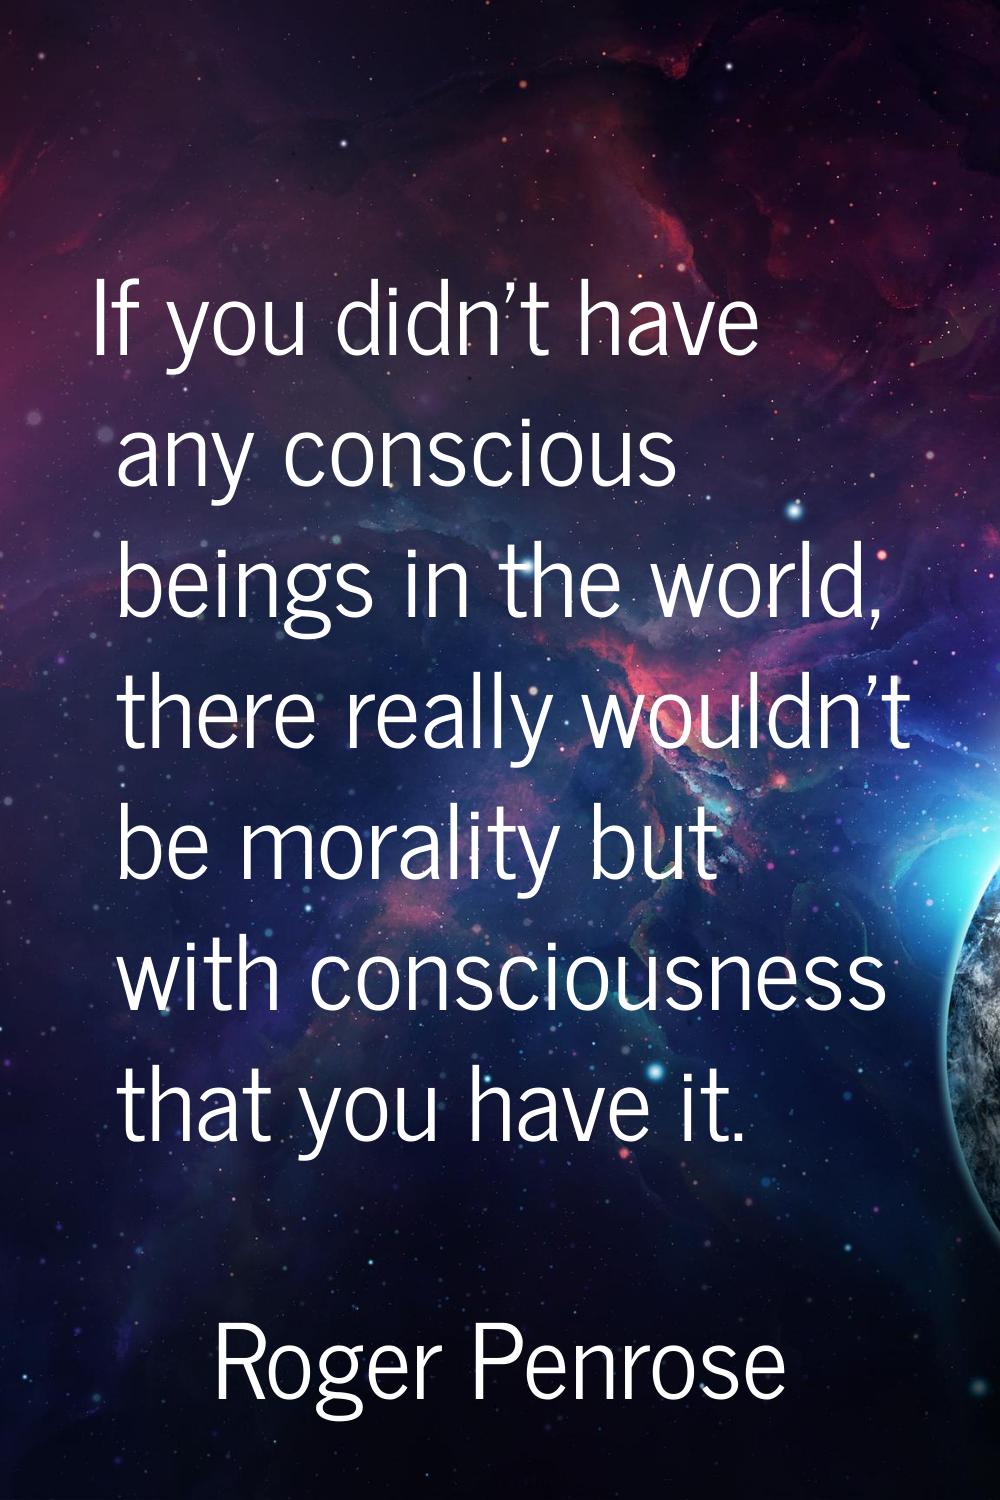 If you didn't have any conscious beings in the world, there really wouldn't be morality but with co